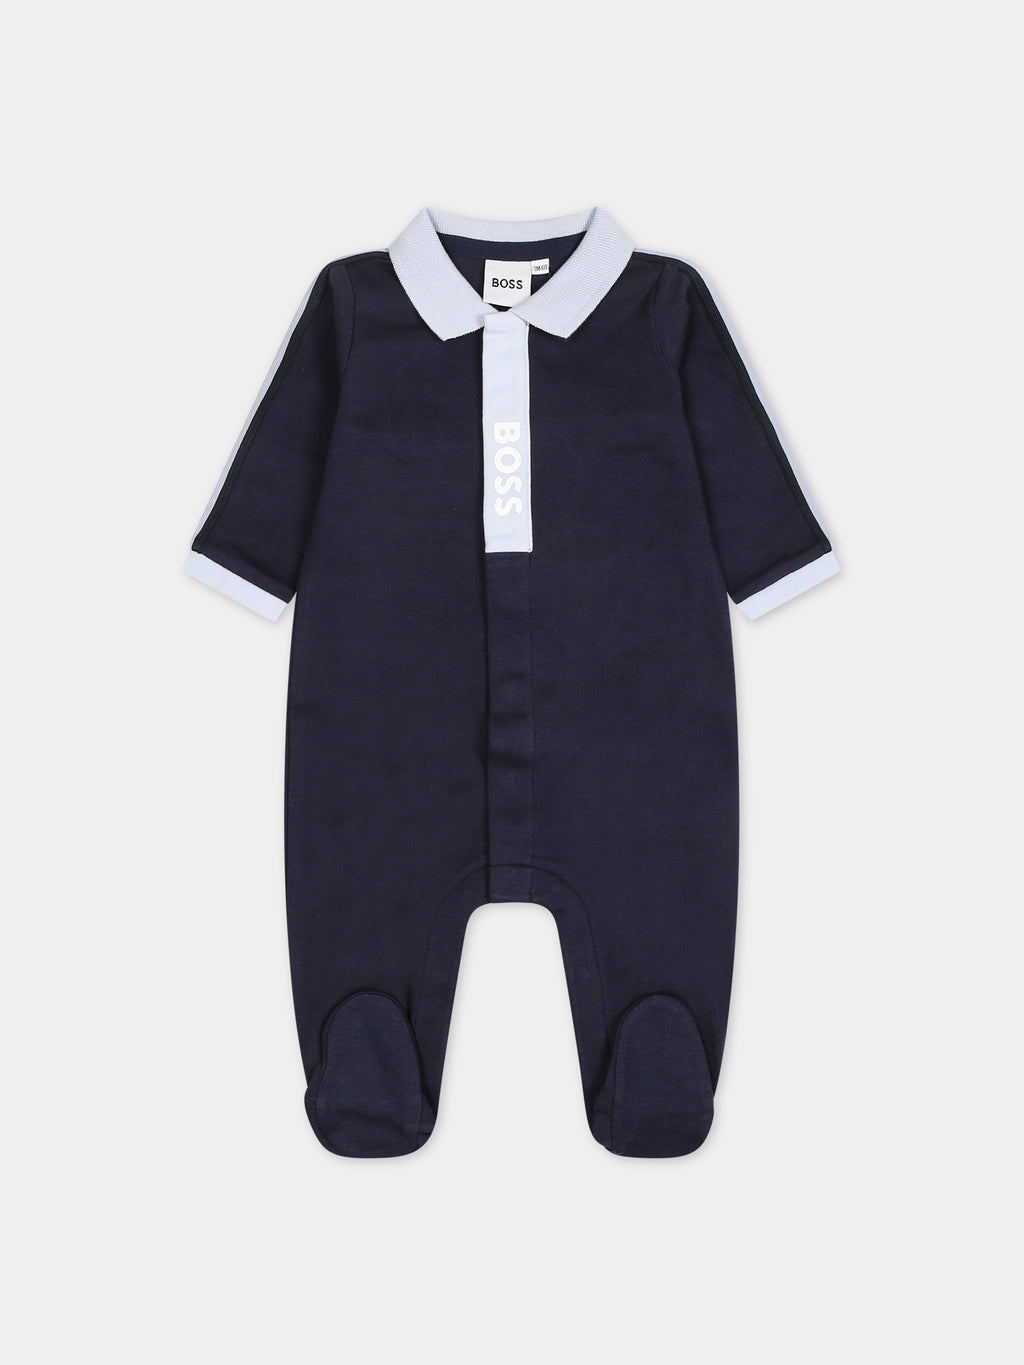 Blue cotton babygrow for baby boy with logo